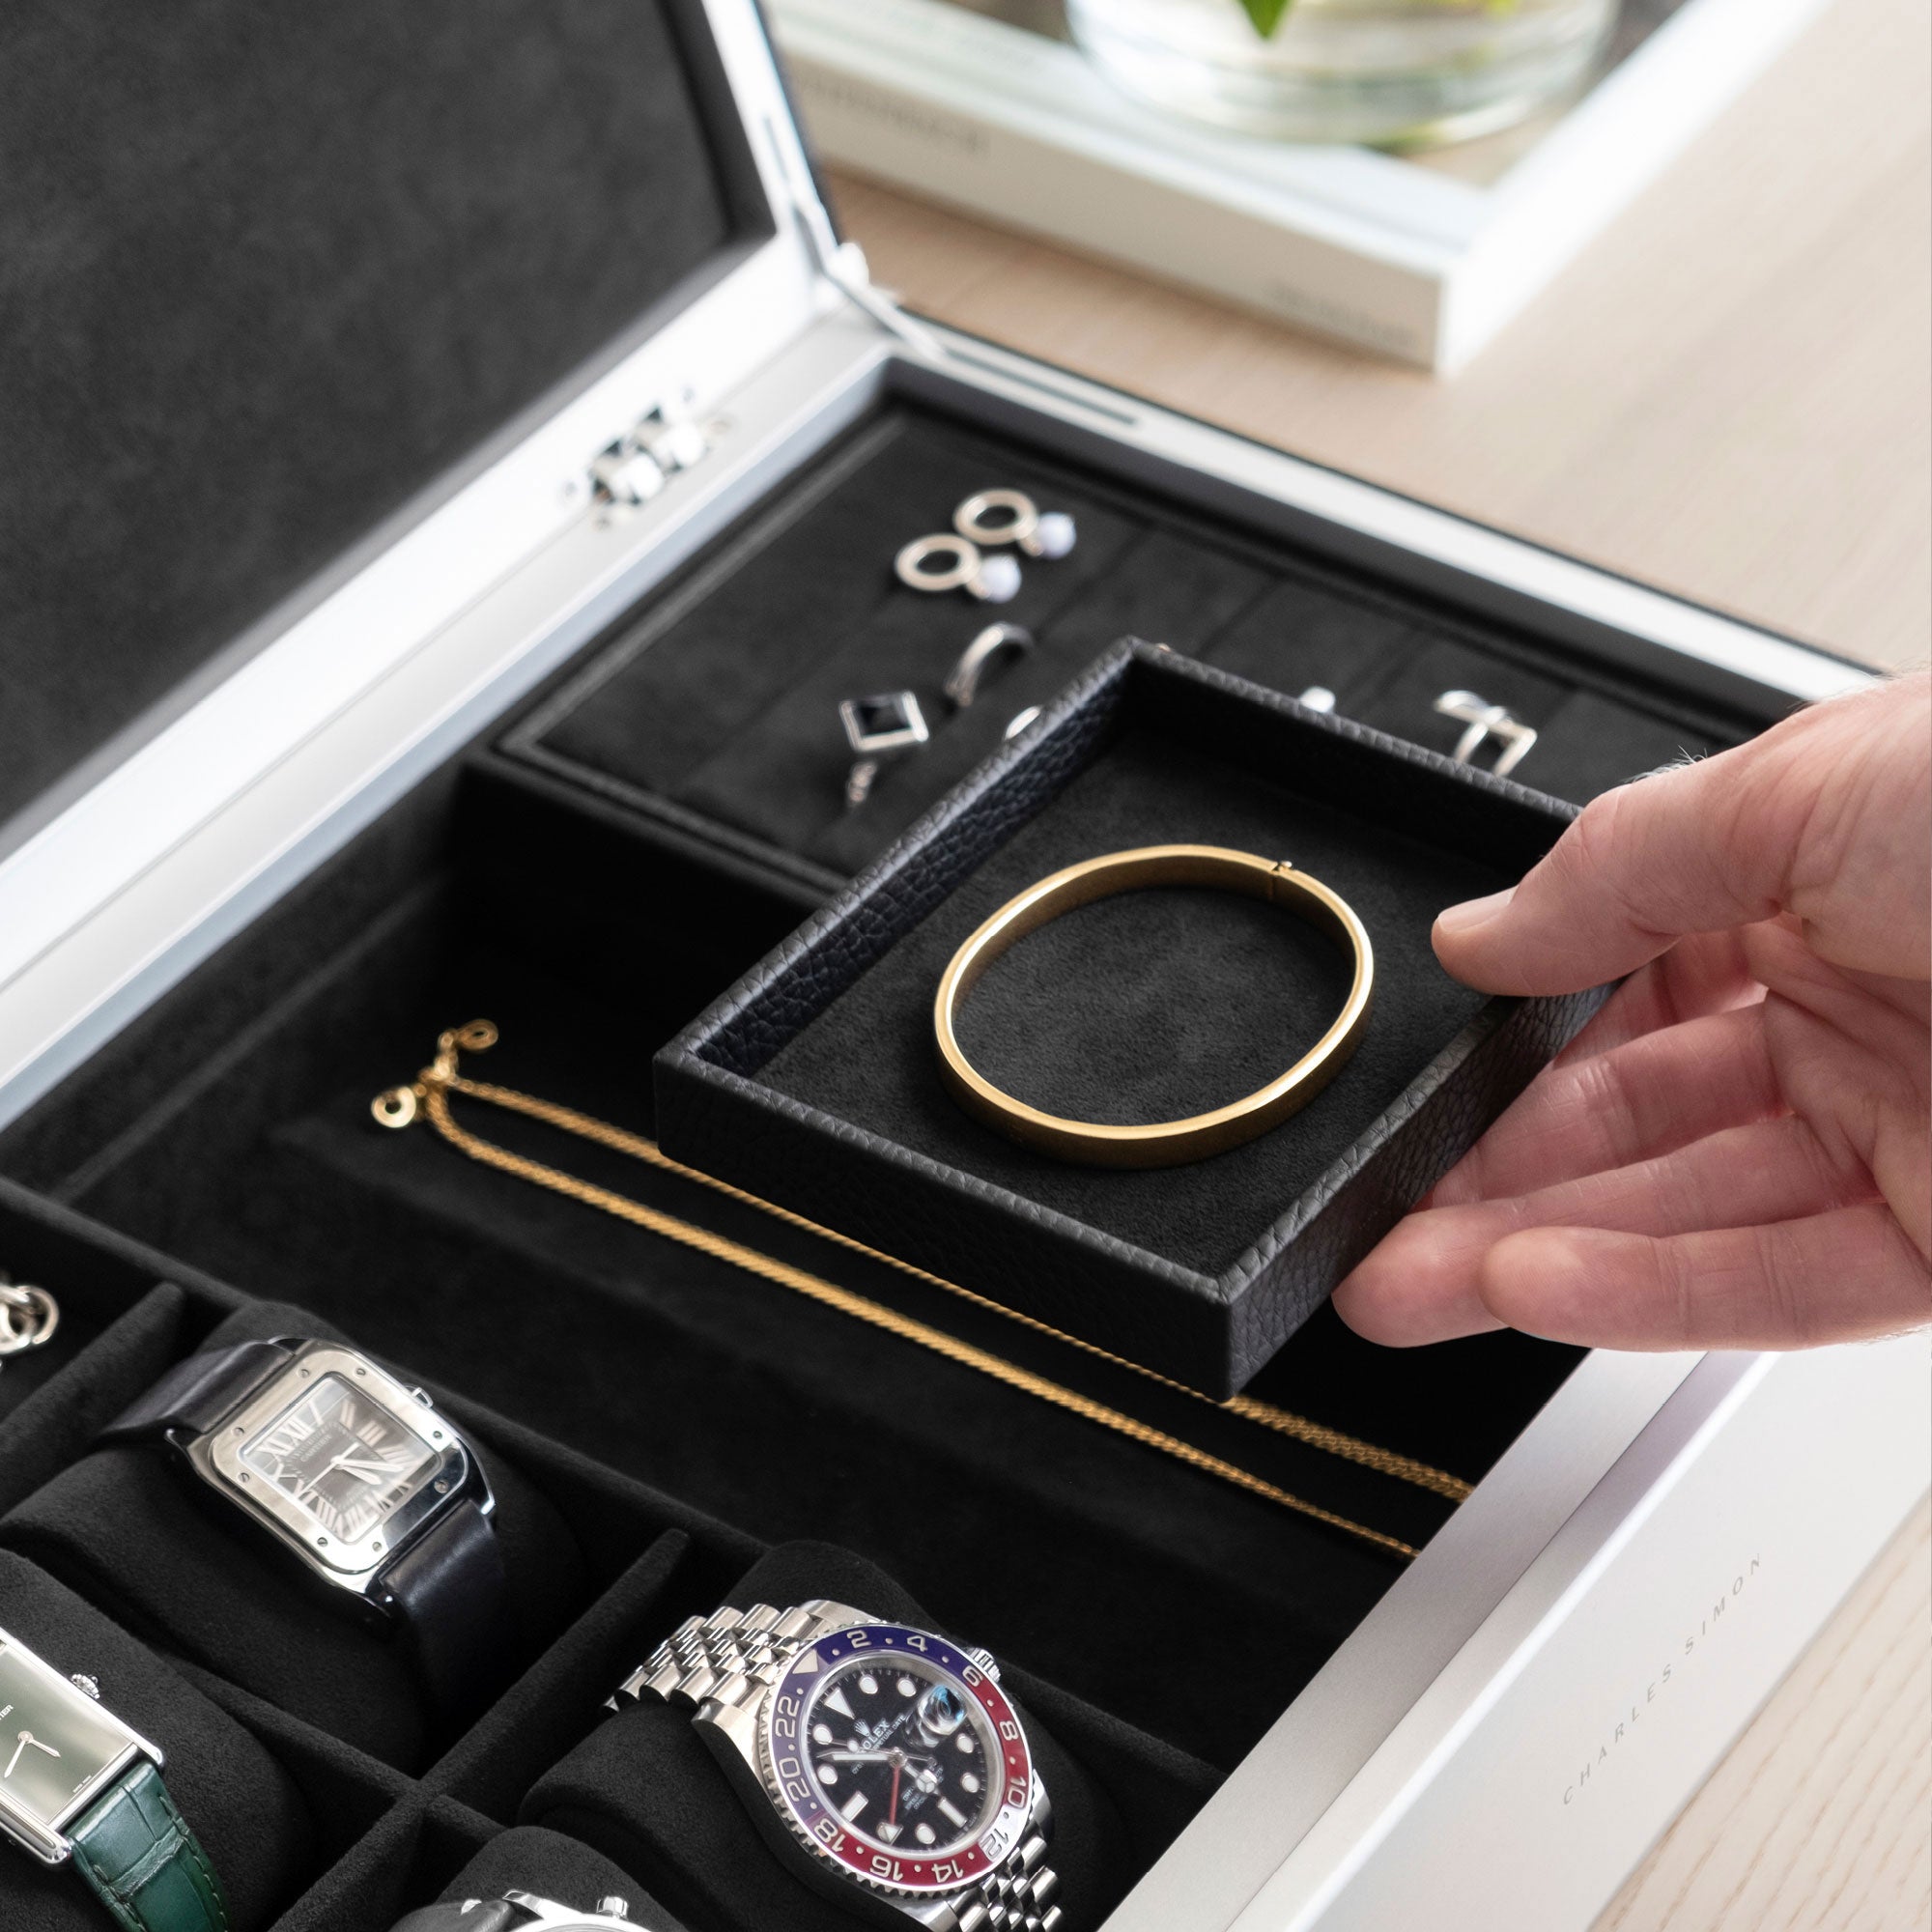 Detail photo of man holding mobile jewelry tray containing a gold bracelet from the black leather and notte interior Taylor 4 Watch and Jewelry box. The Taylor 4 Watch and Jewelry box is storing 4 luxury watches and a collection of fine jewelry, including silver rings, earrings, bracelets and necklaces.